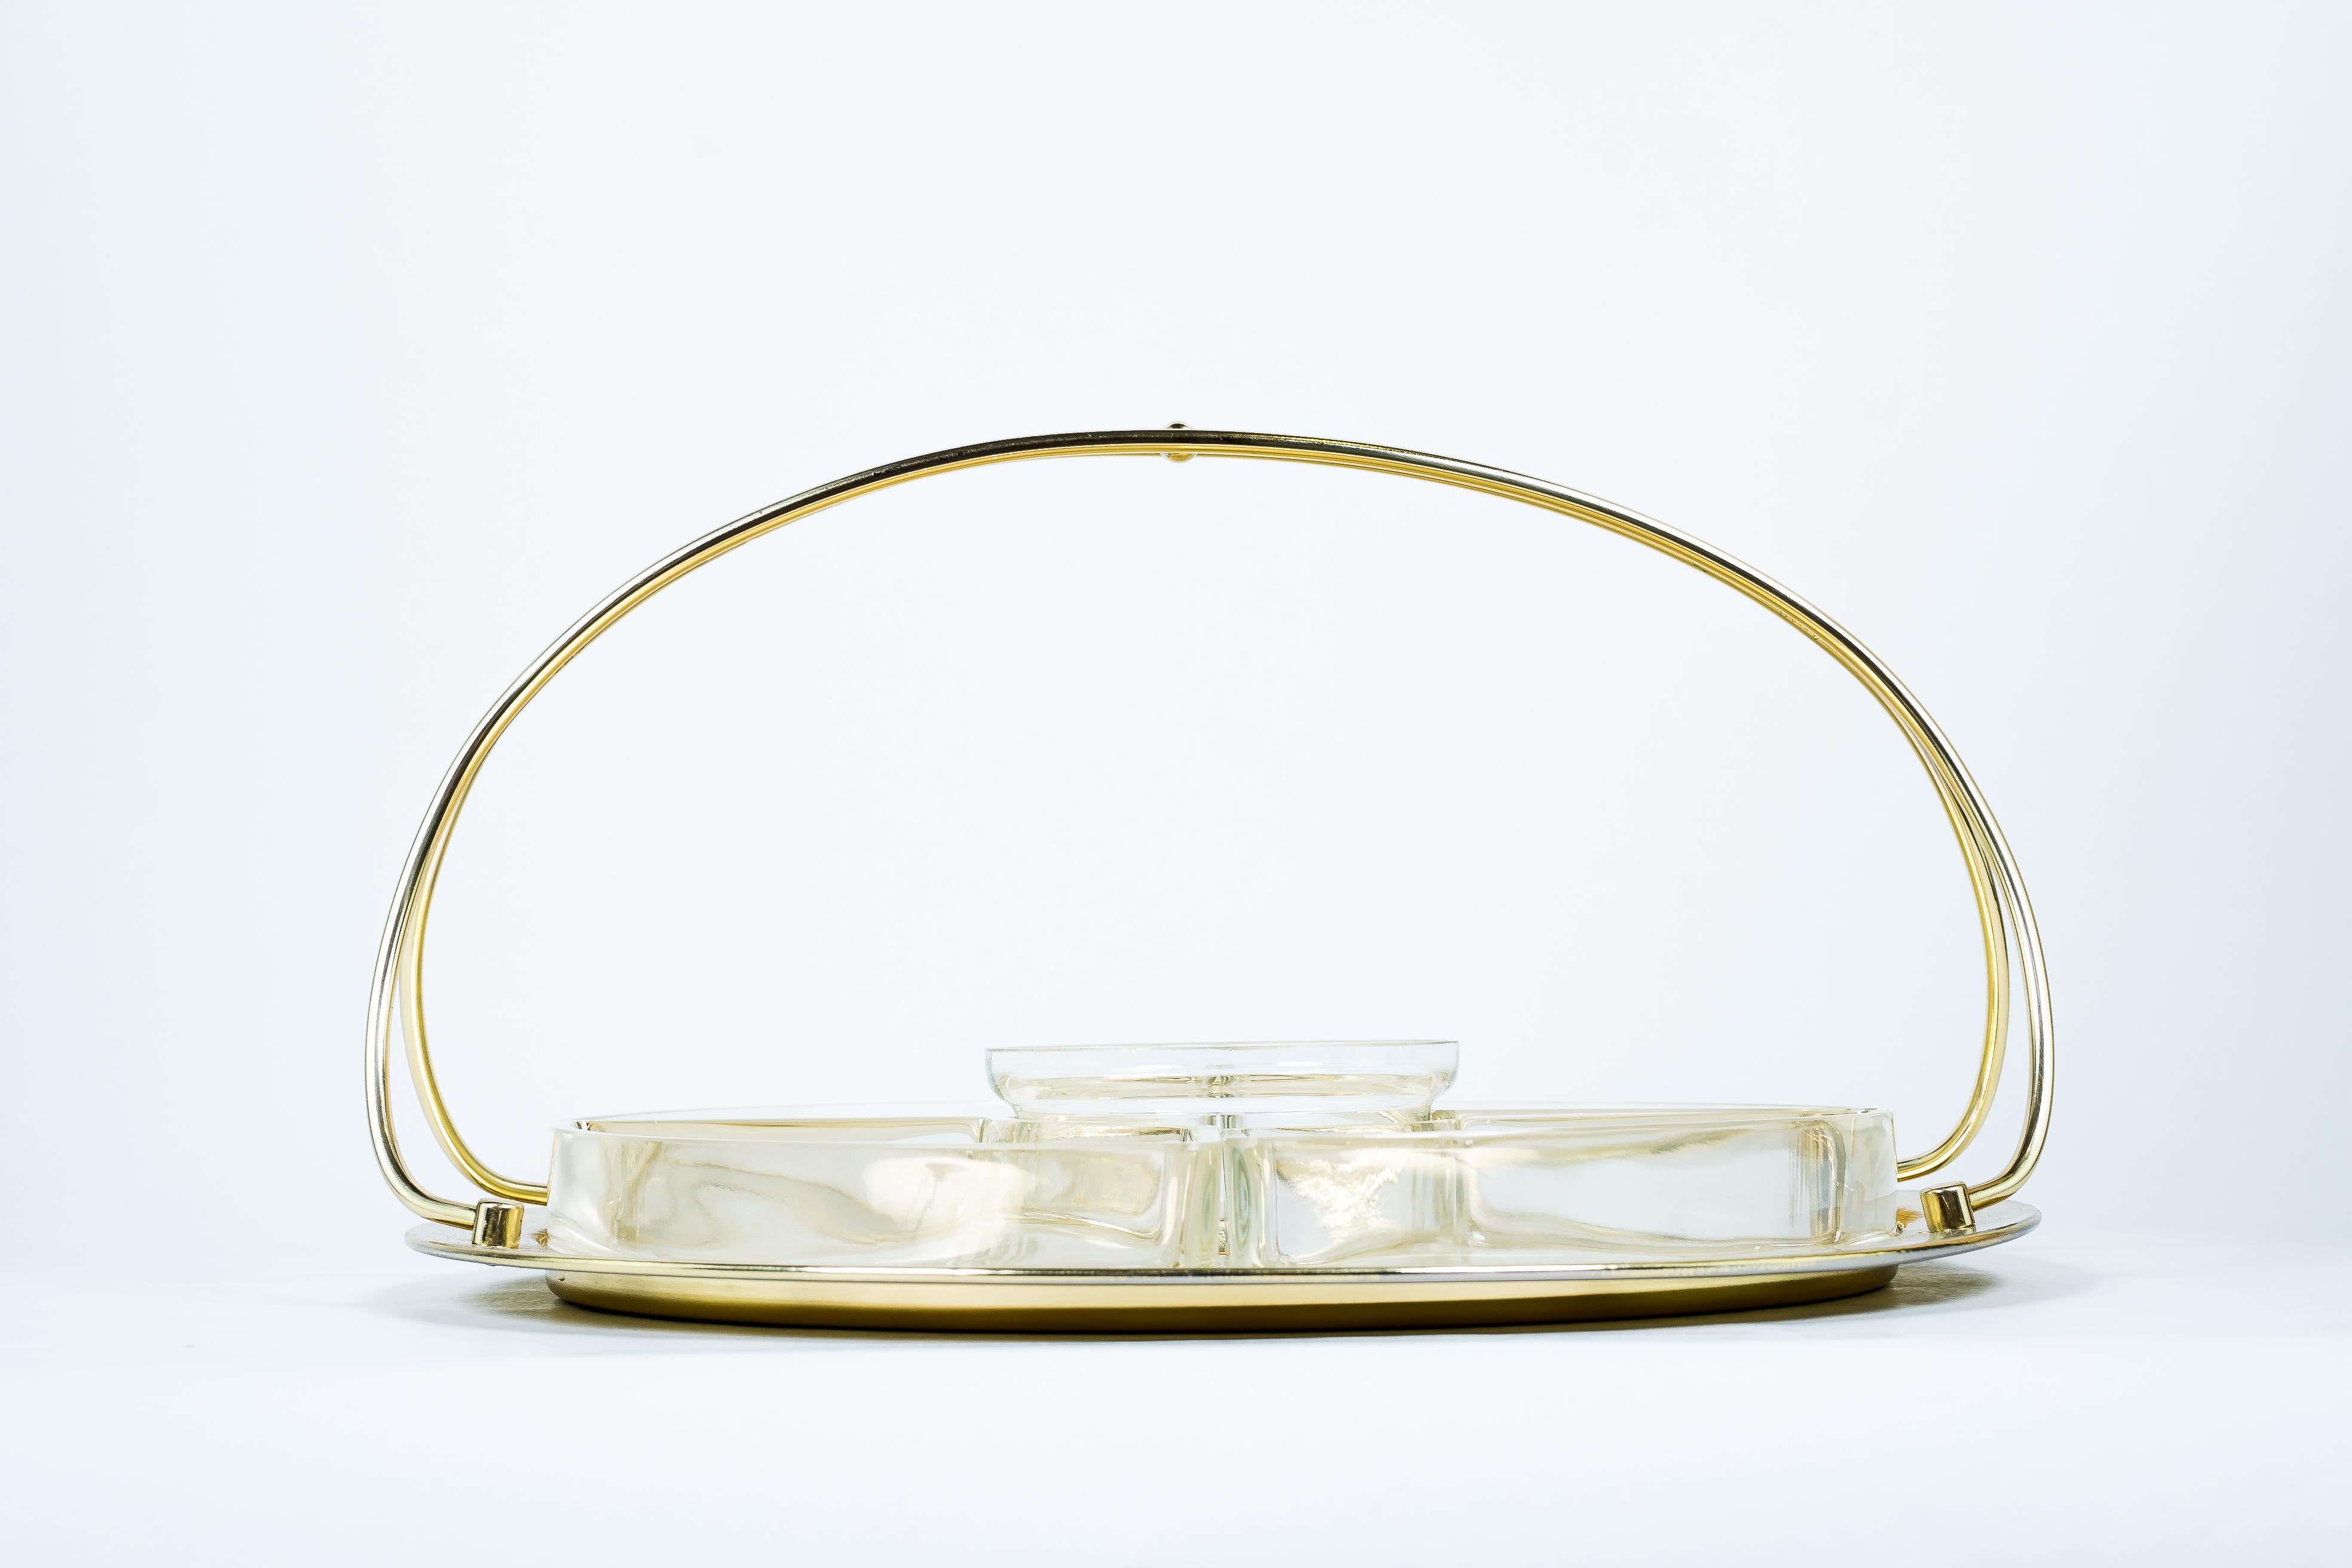 Lacquered Art Deco Centerpiece Cut Glass and Brass Execution, Around 1920s For Sale